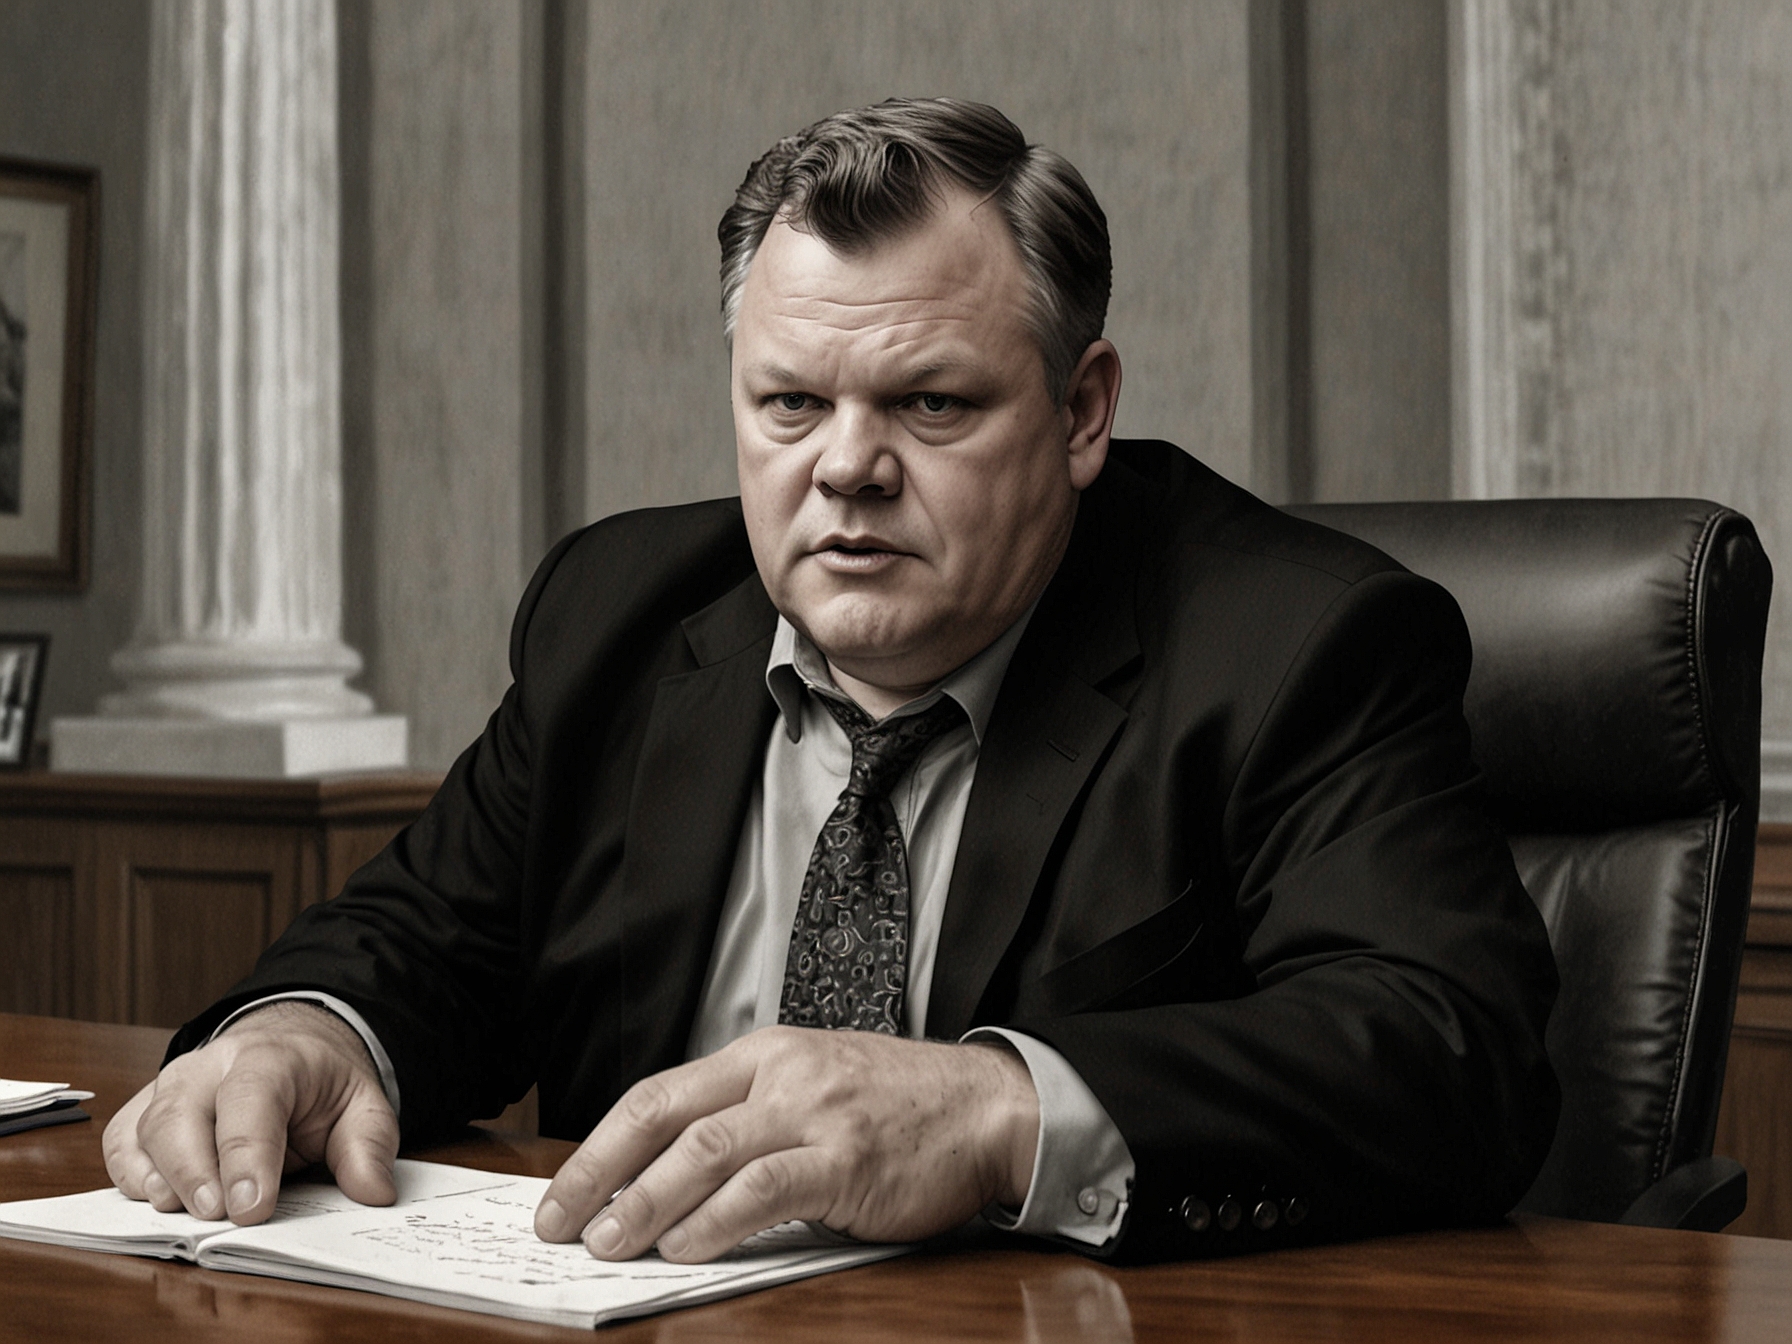 A candid image of Senator Jon Tester responding passionately during an interview, emphasizing the irrelevance of his car choice to his legislative duties and defending his personal preferences.